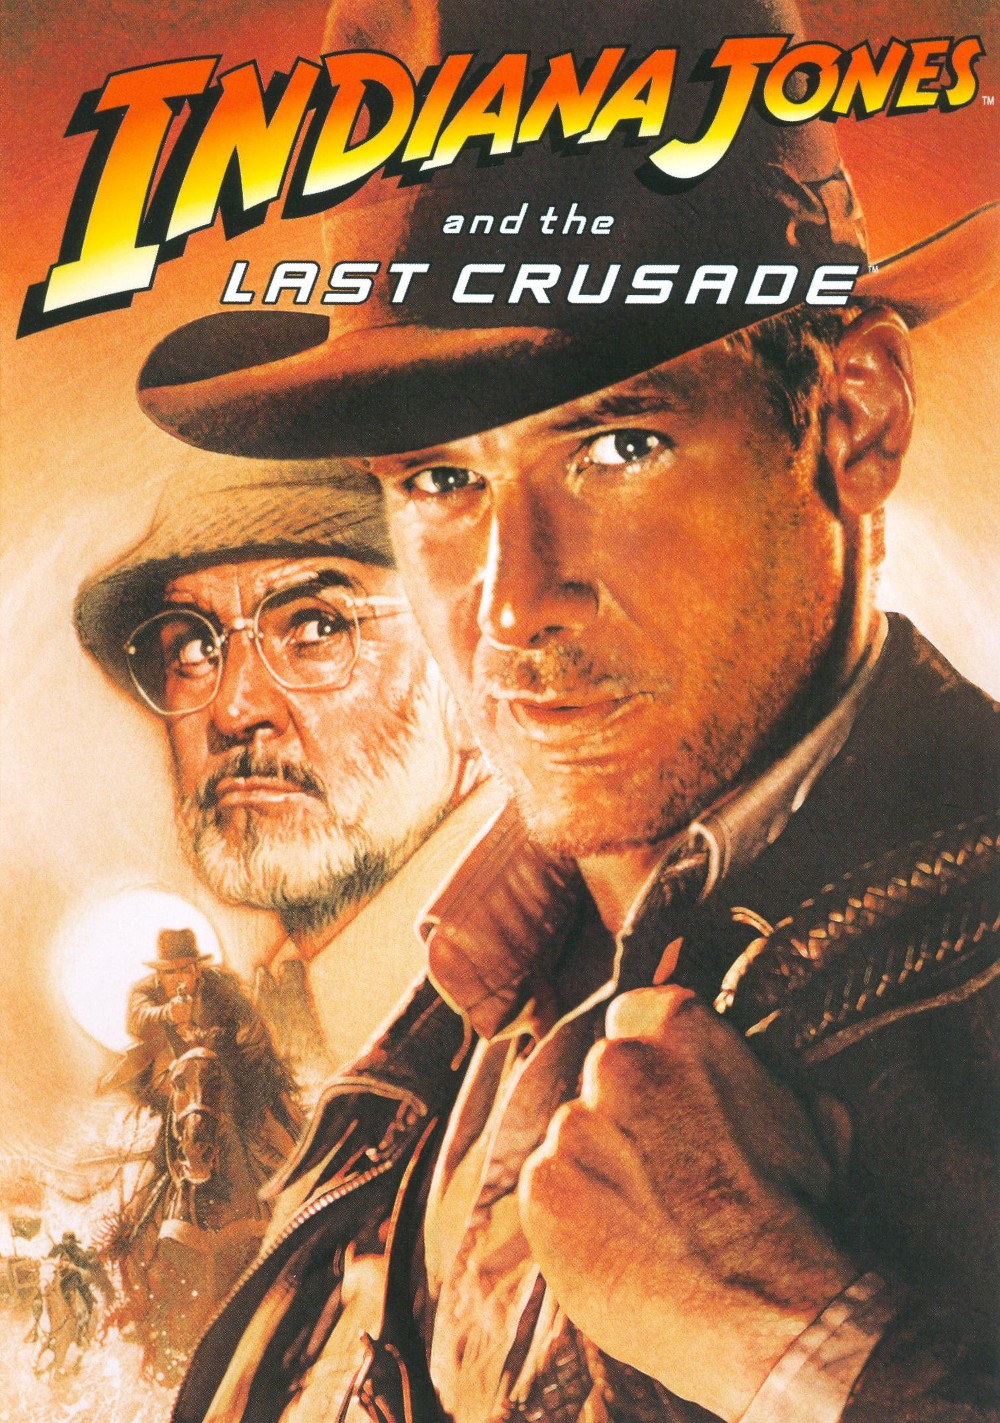 Indiana Jones and the Last Crusade (DVD), Paramount, Action & Adventure - image 3 of 4